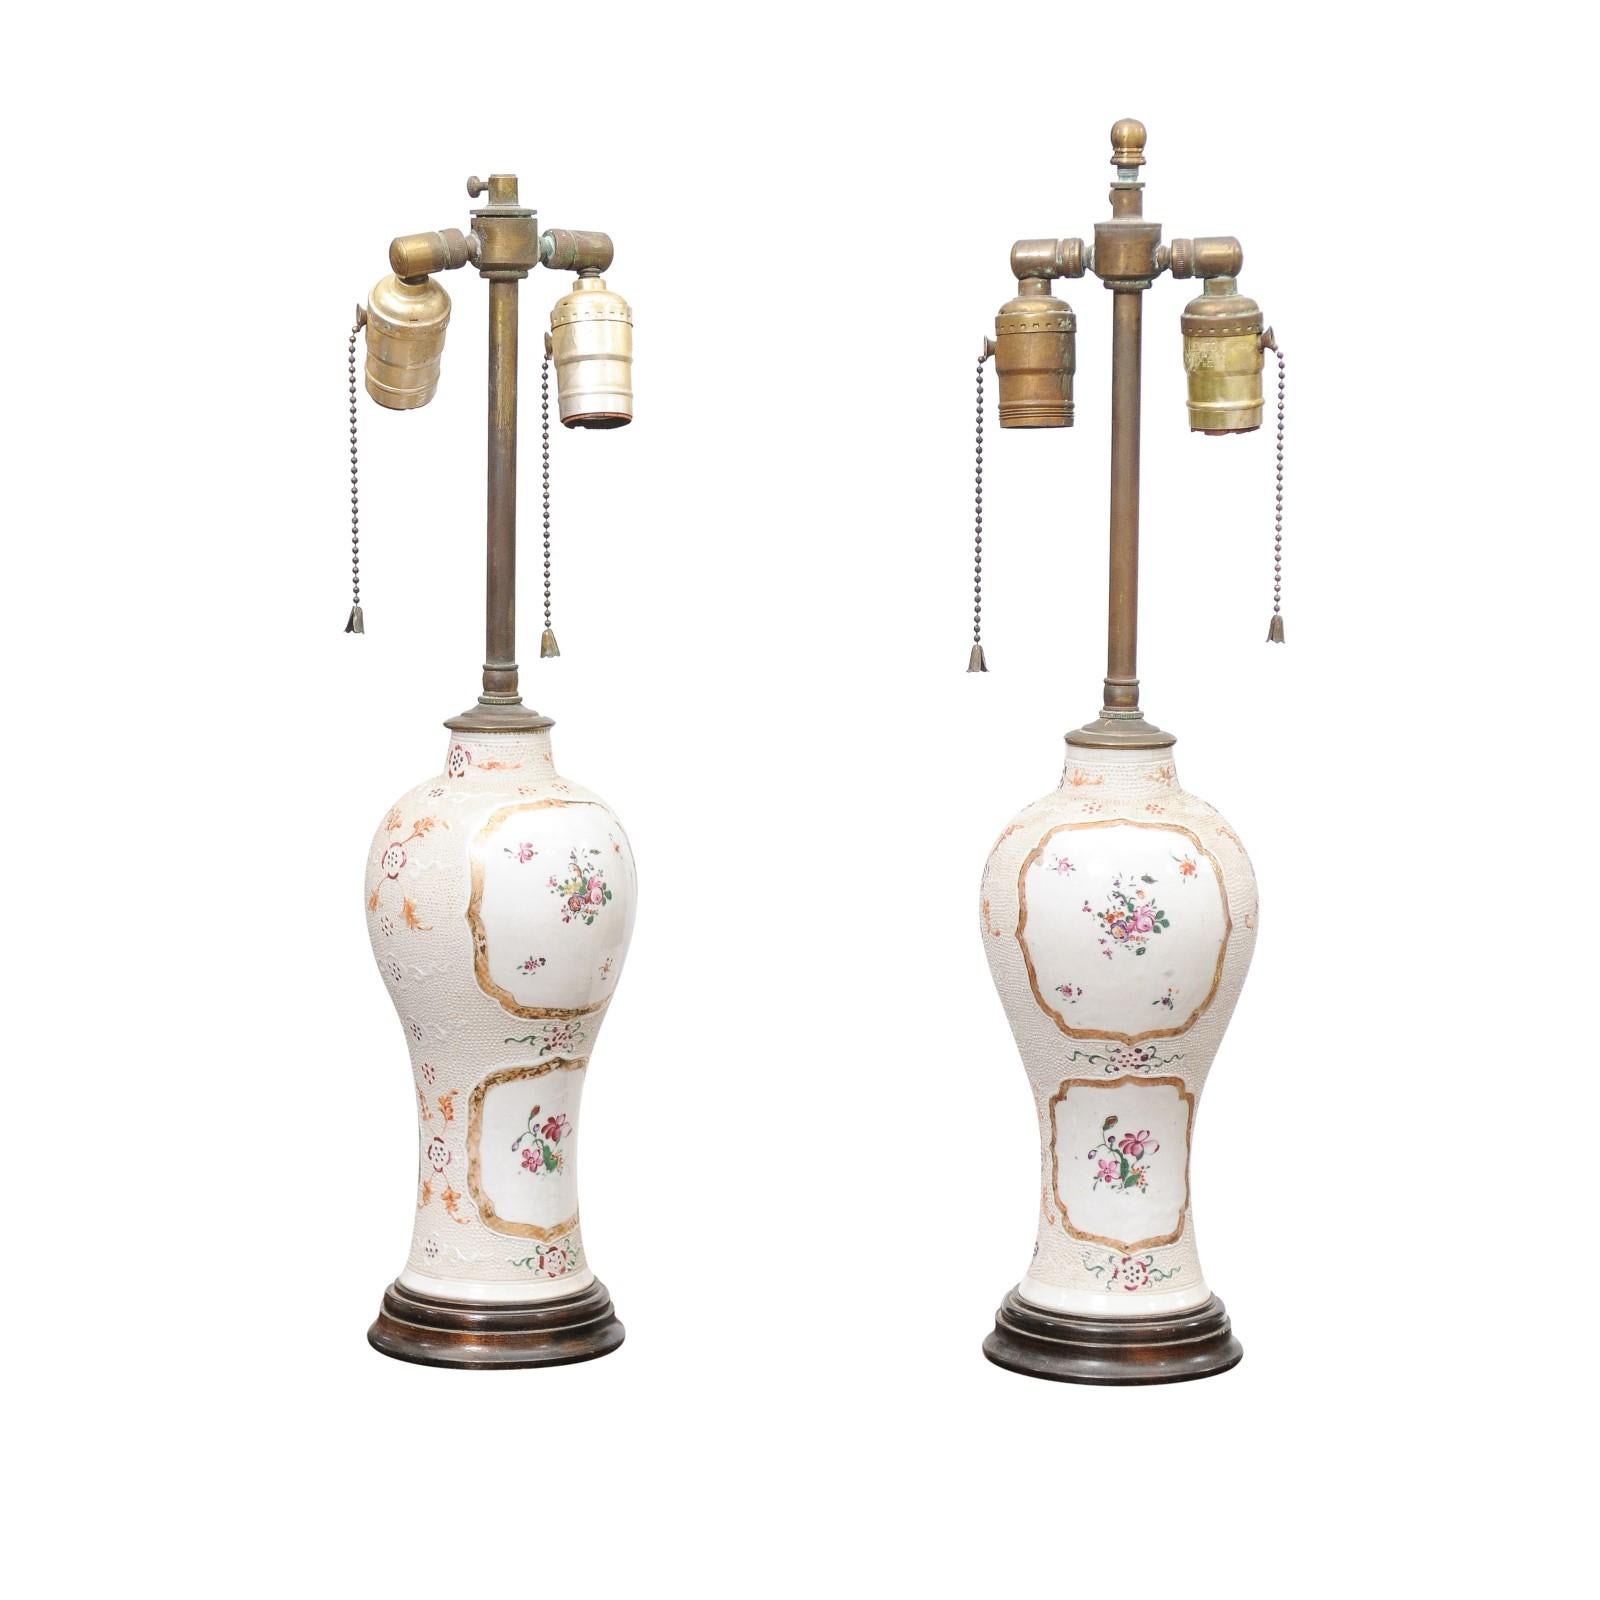 Pair of 18th Century Chinese Export “Chicken Skin” Famille Rose Vases, wired as Lamps